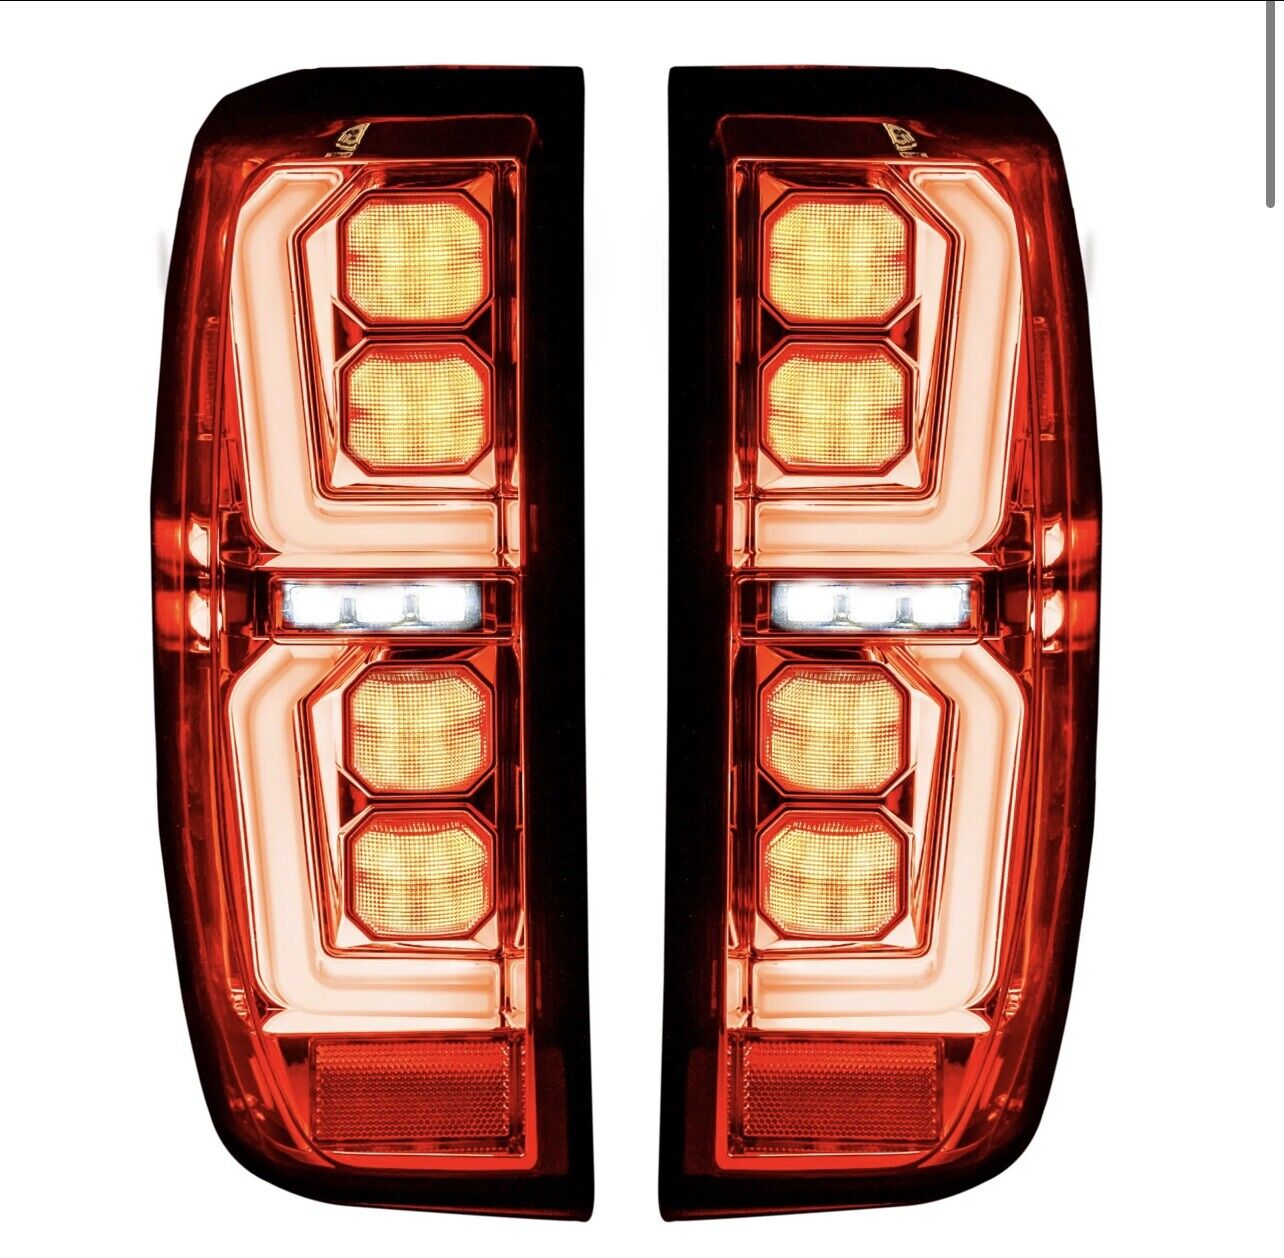 GMC, GMC Sierra Tail Lights, Sierra 1500 Tail Lights, Sierra 2500 Tail Lights, Sierra 3500 Tail Lights, Tail Lights Clear